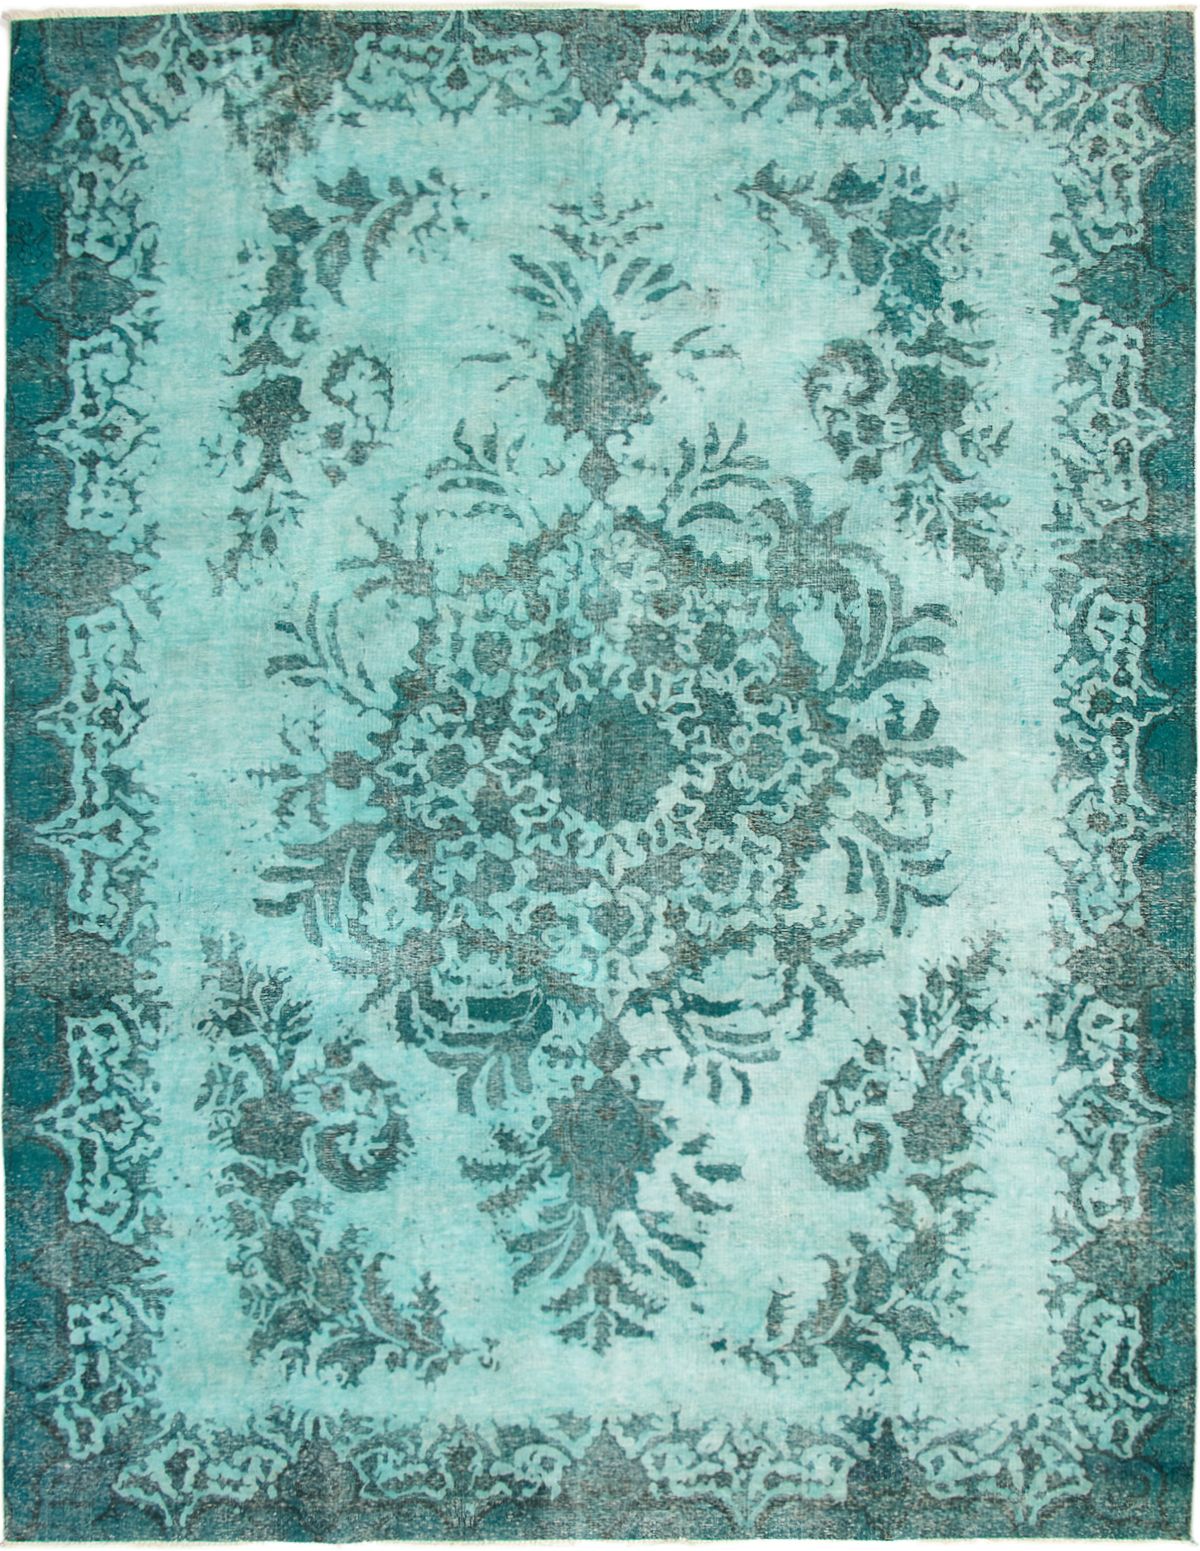 Hand-knotted Color Transition Light Green Wool Rug 9'6" x 12'4" Size: 9'6" x 12'4"  